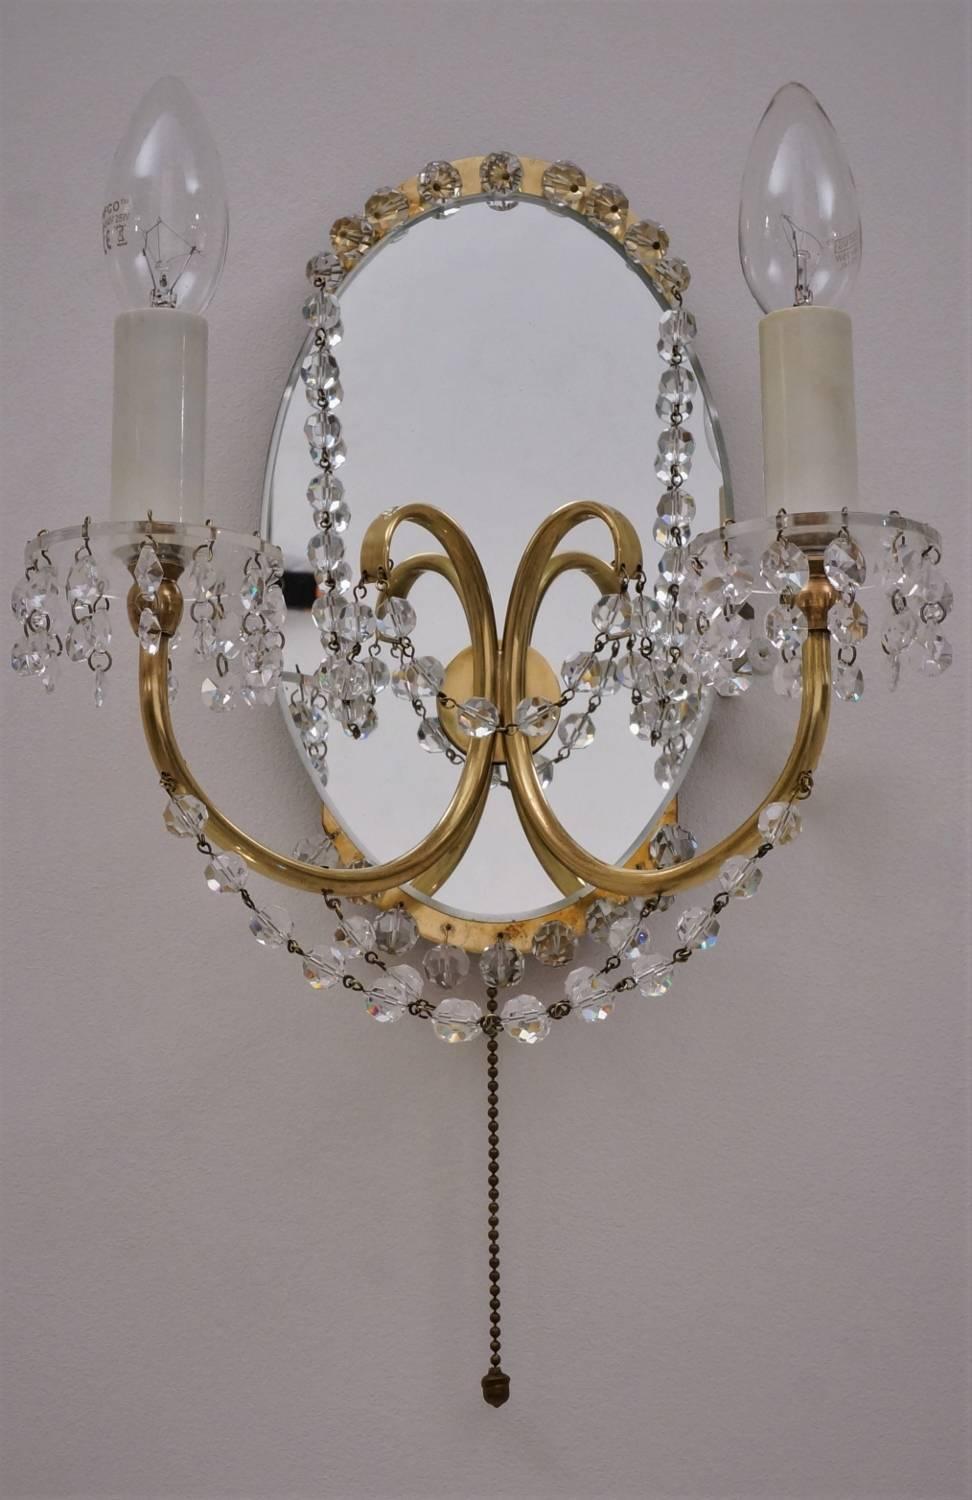 Mid-20th Century Maison Jansen Sconces Crystal Beads, Brass and Mirror, French, circa 1940s